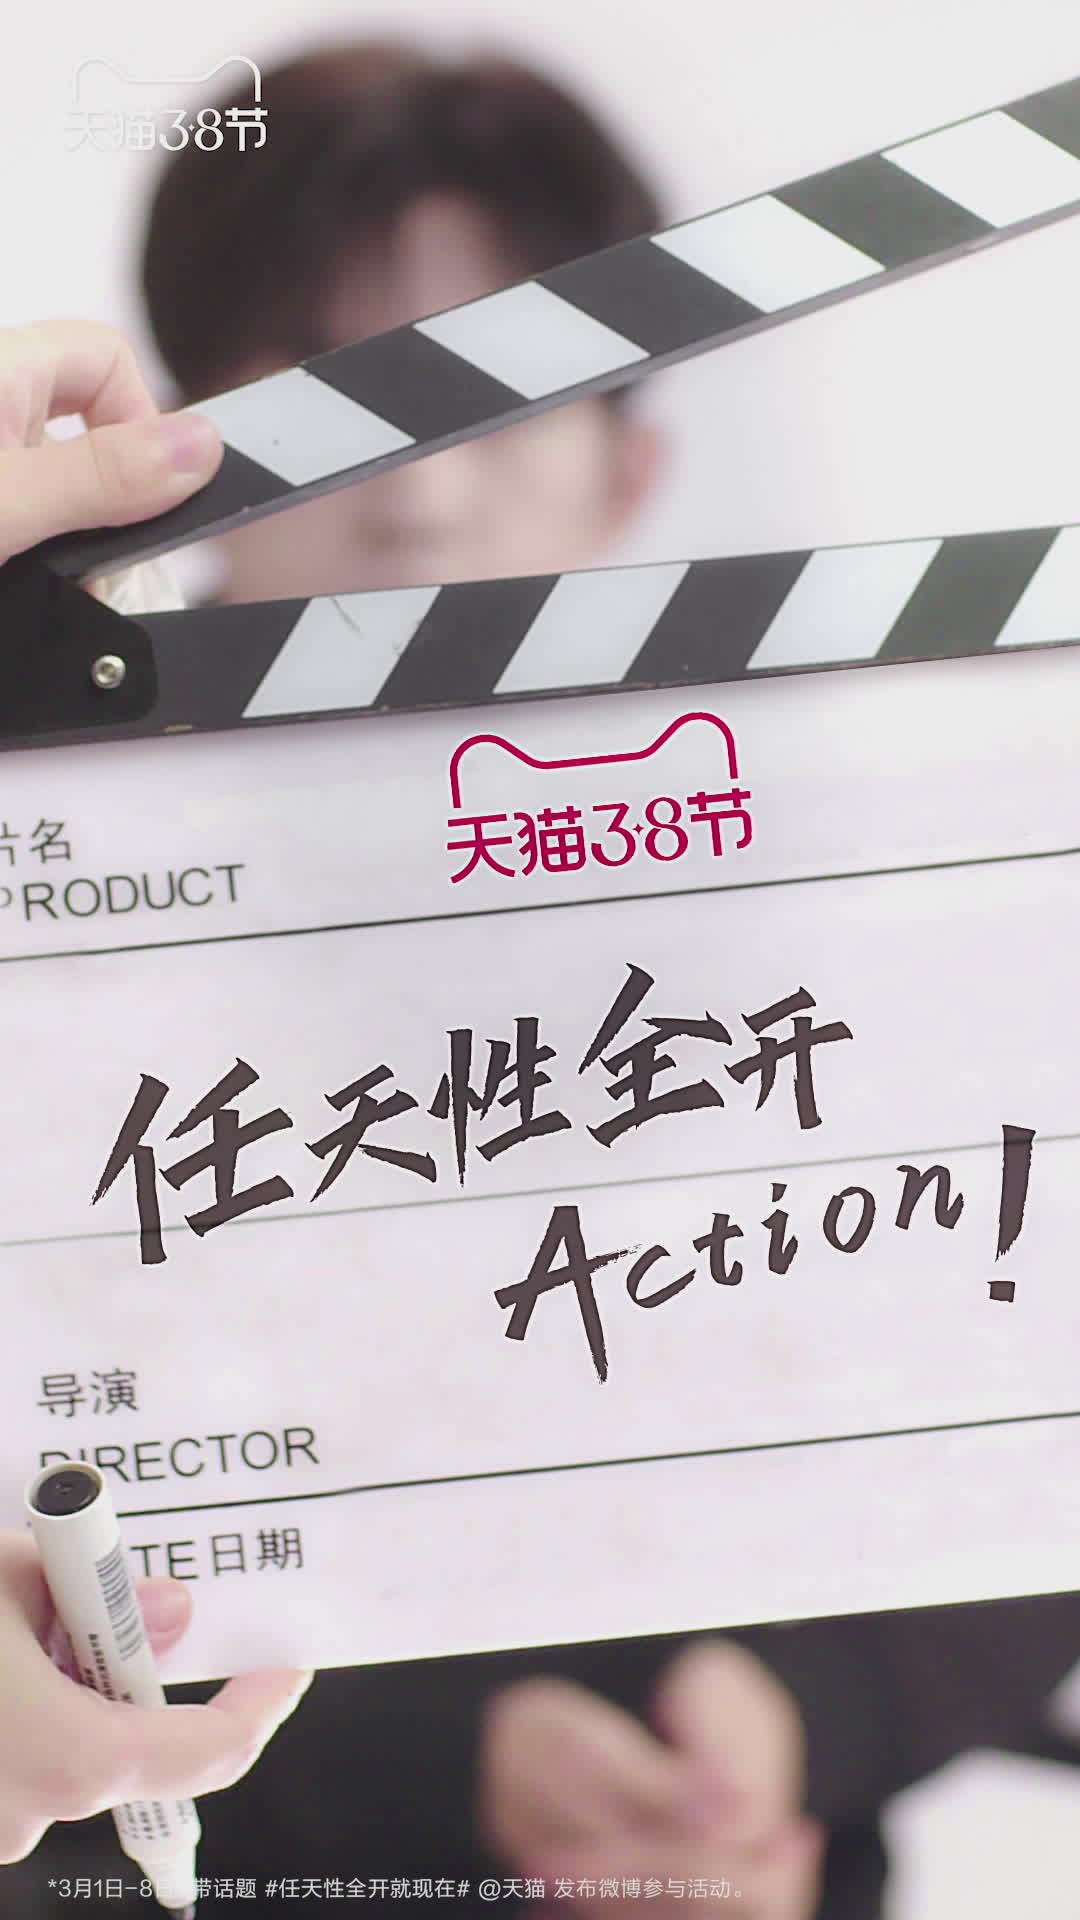 TMALL_Action_final